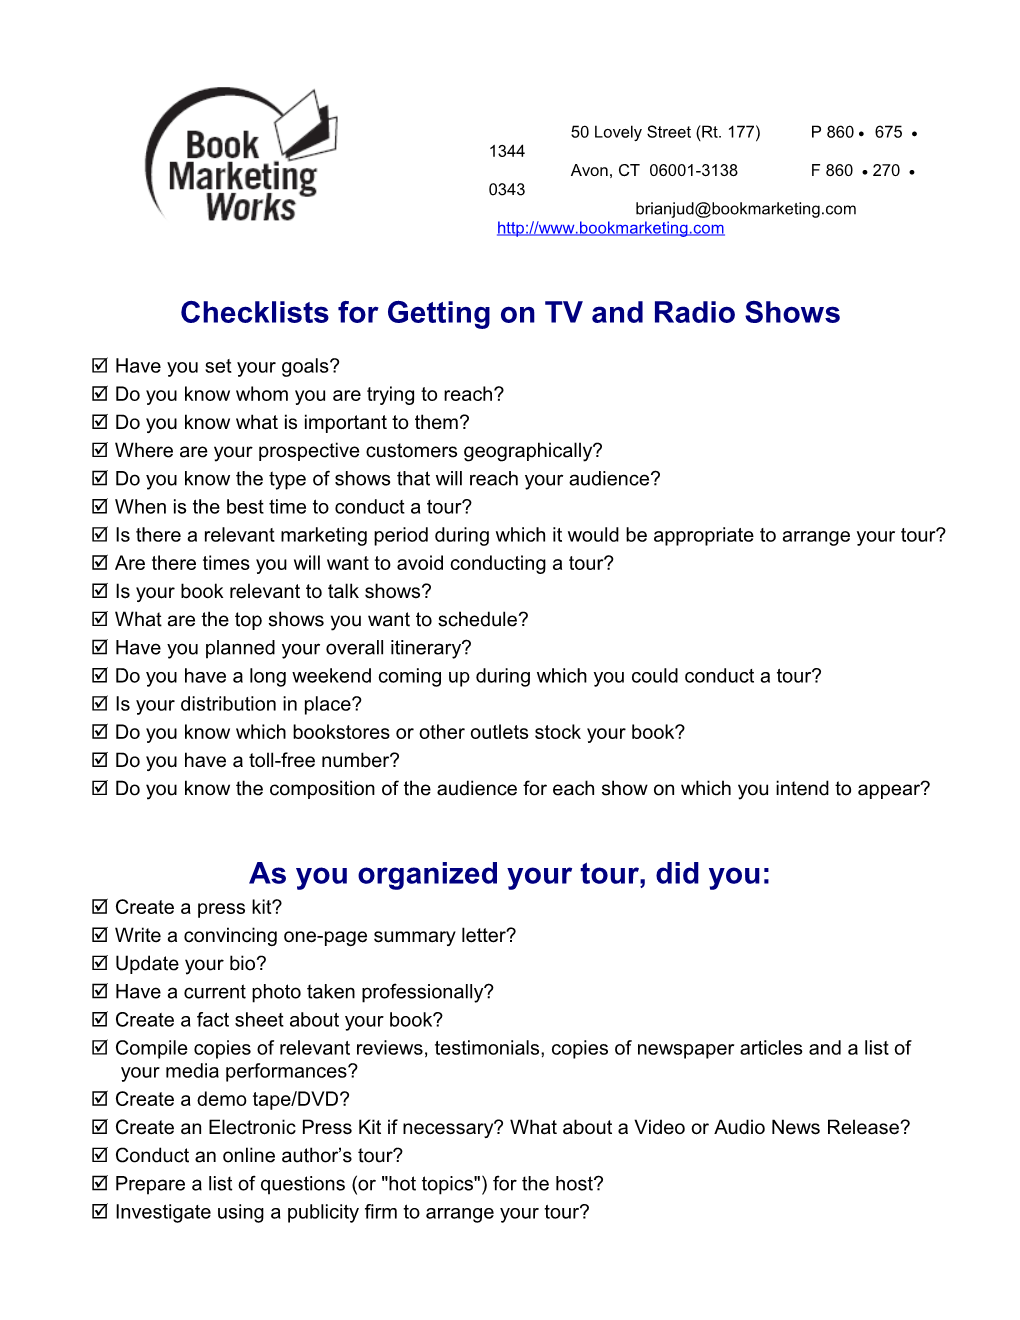 Checklists for Getting on TV and Radio Shows